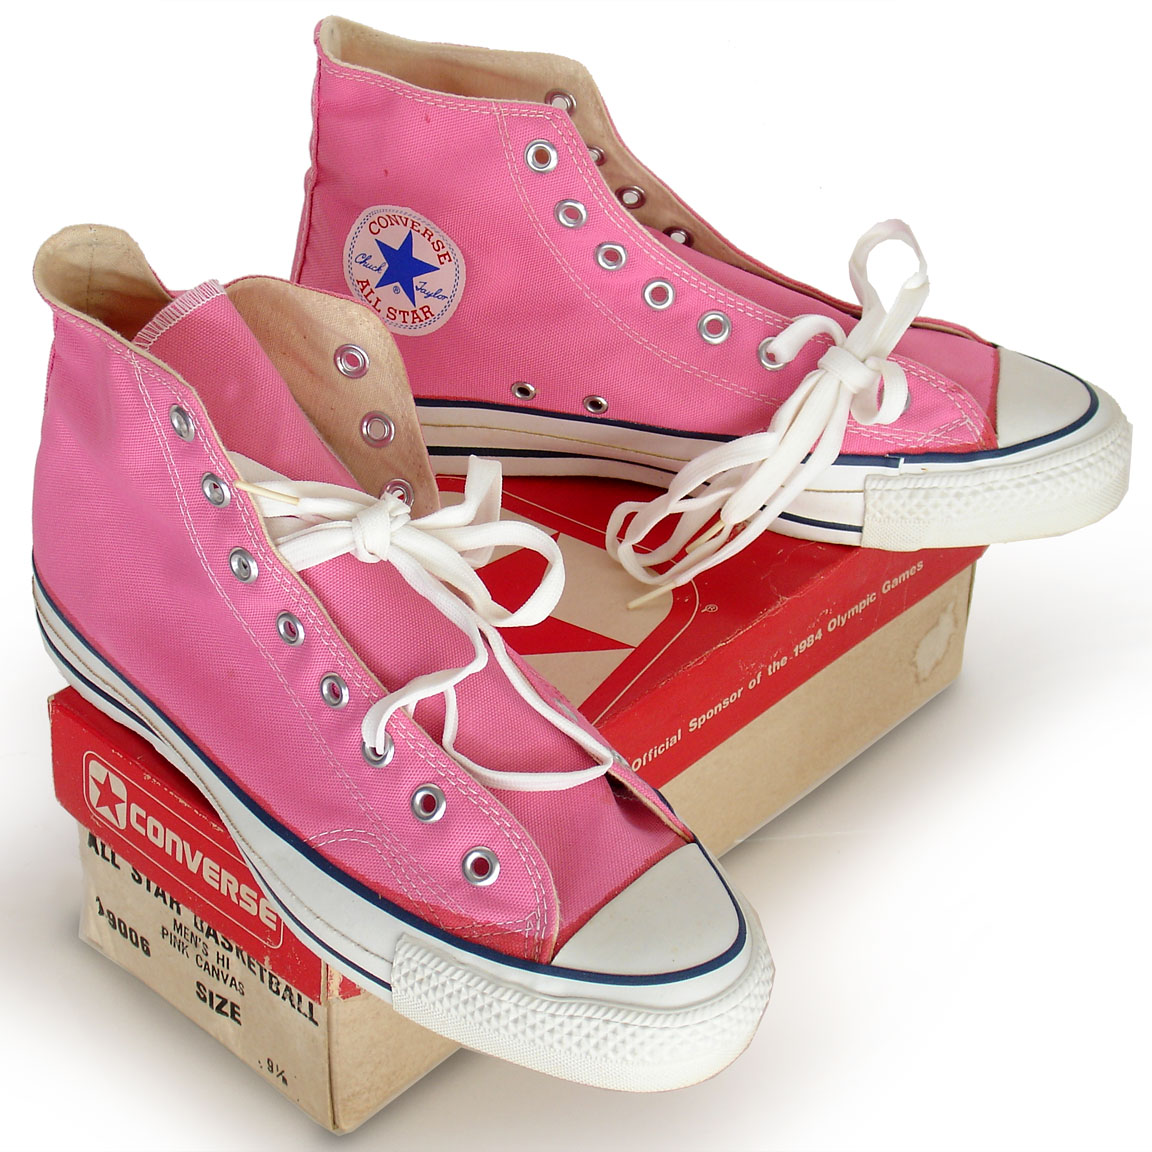 Real men DO wear pink. Vintage American-made Converse All Star Chuck Taylor pink shoes for sale at http://www.collectornet.net/shoes